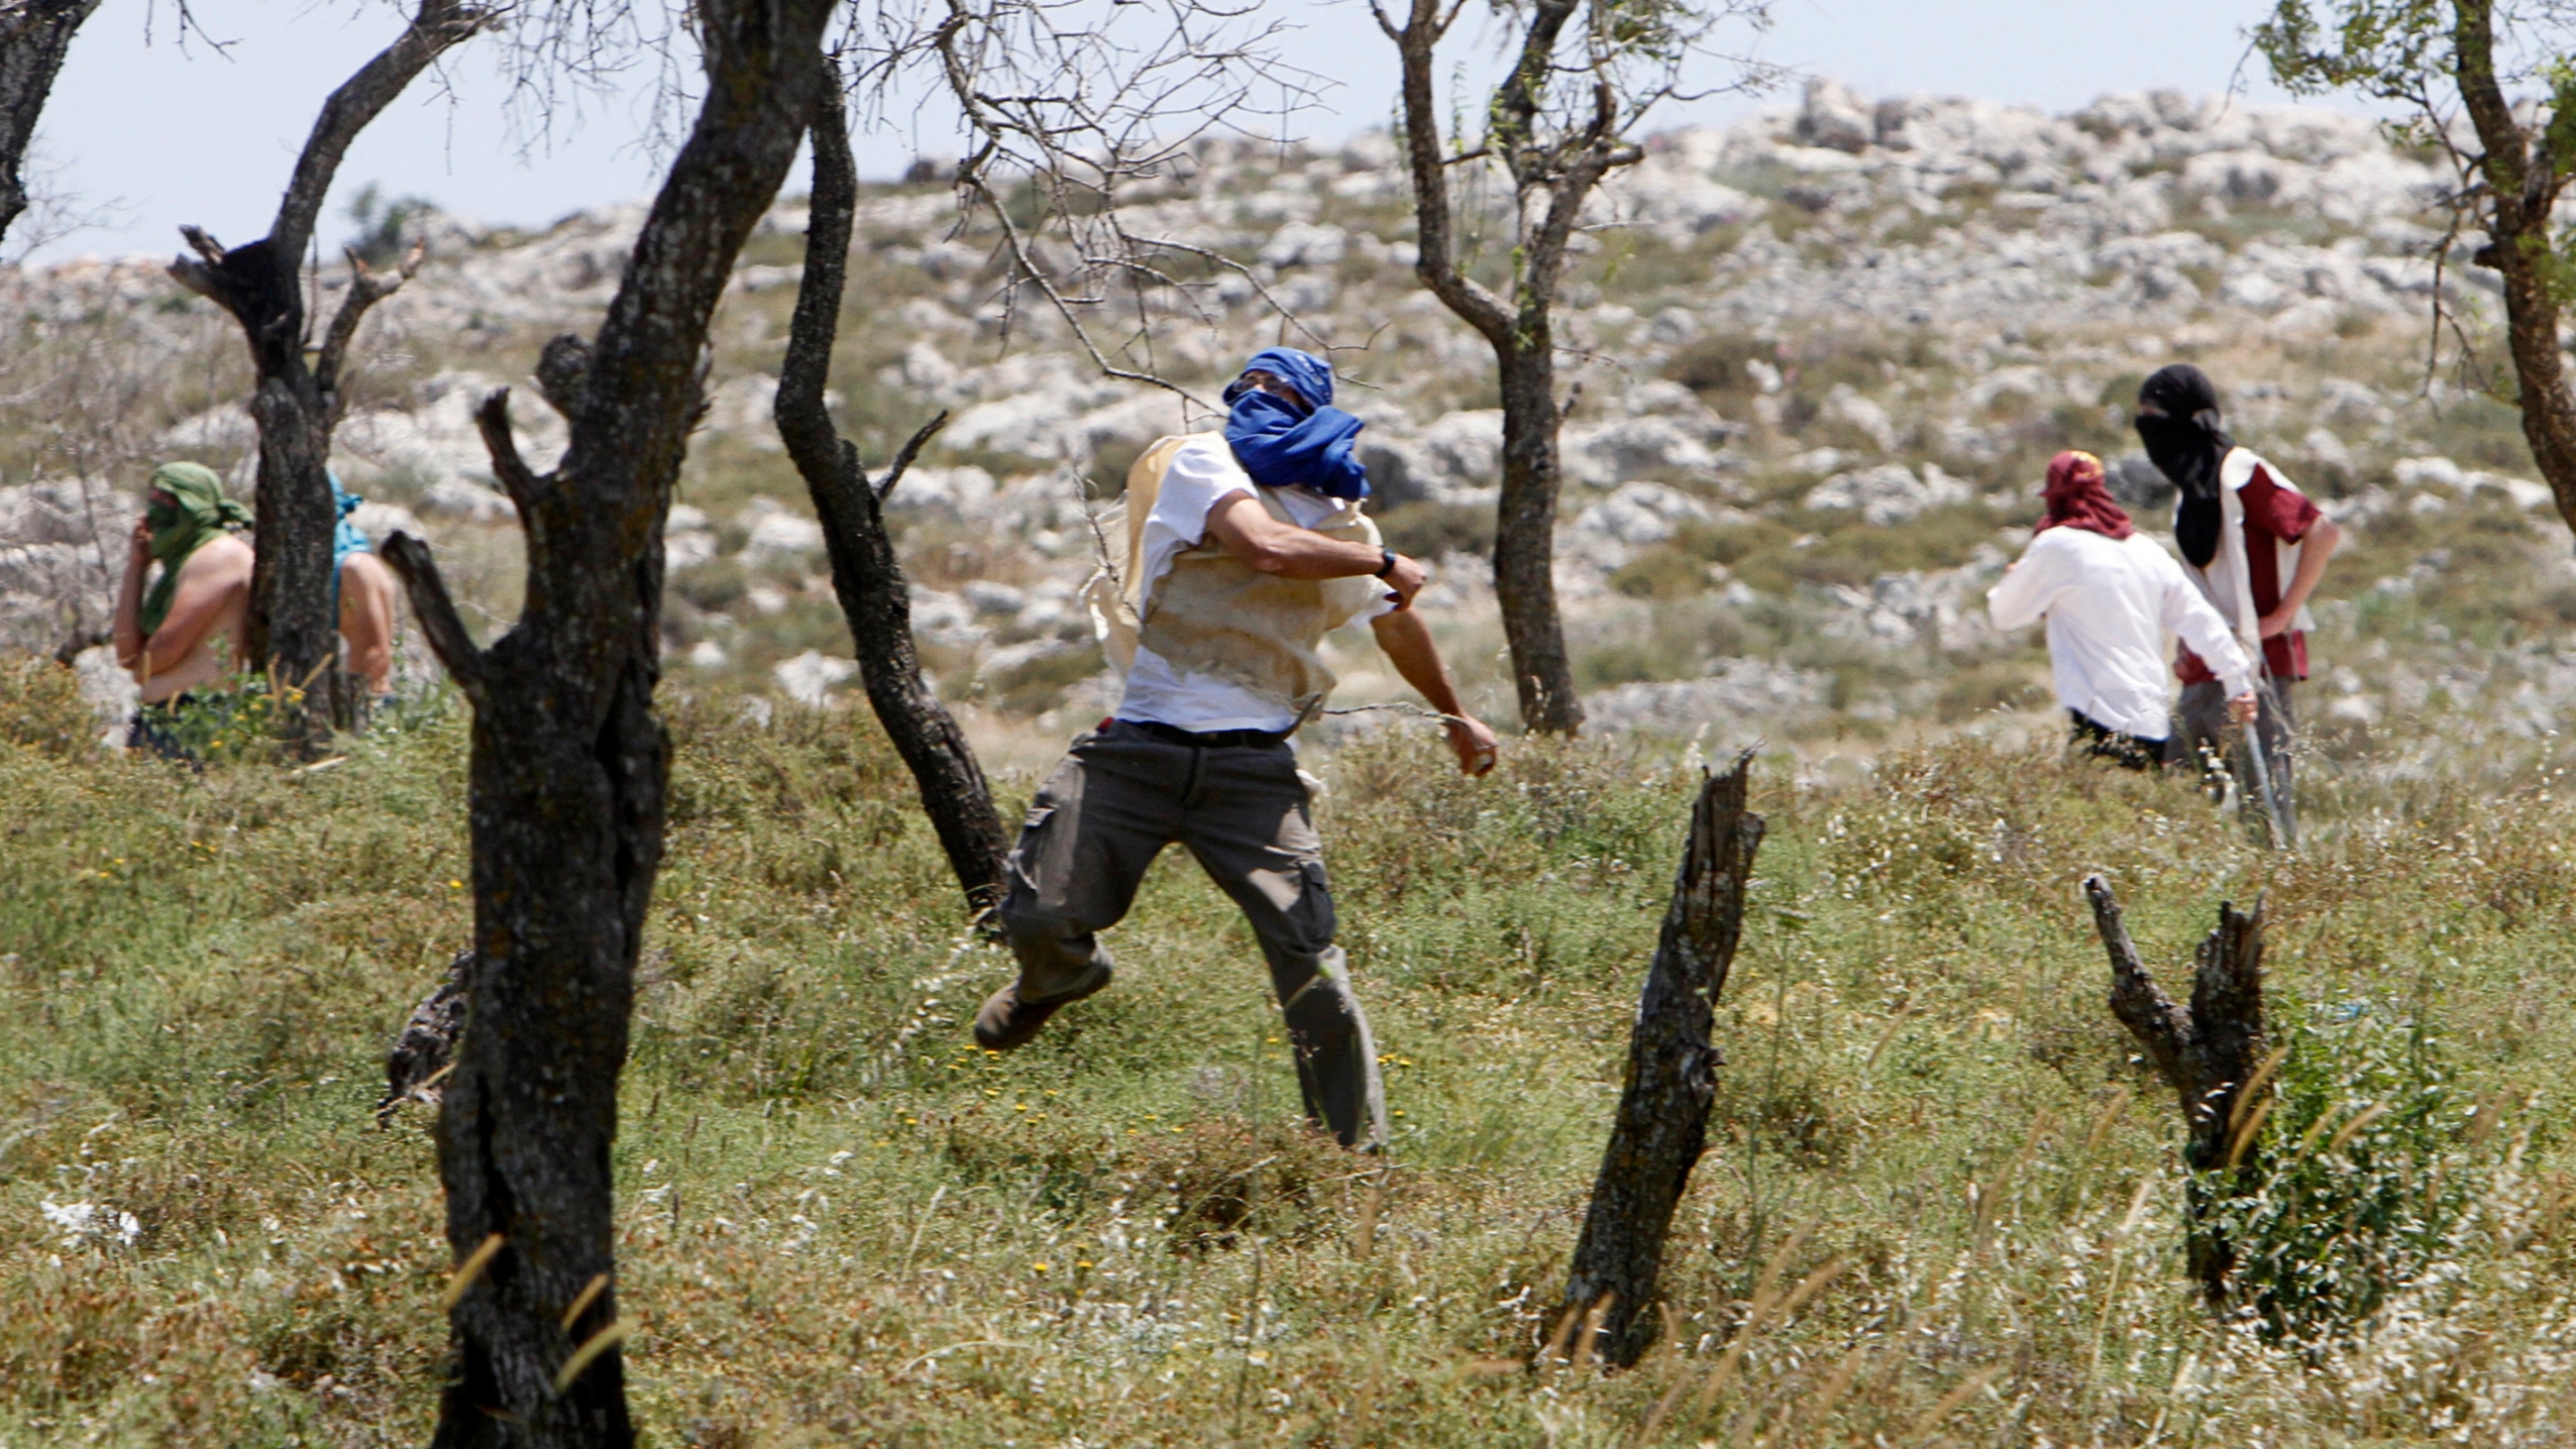 A masked Israeli settler throws stones towards Palestinians during clashes in the West bank village of Urif, near Nablus 30 April 2013 (Reuters)